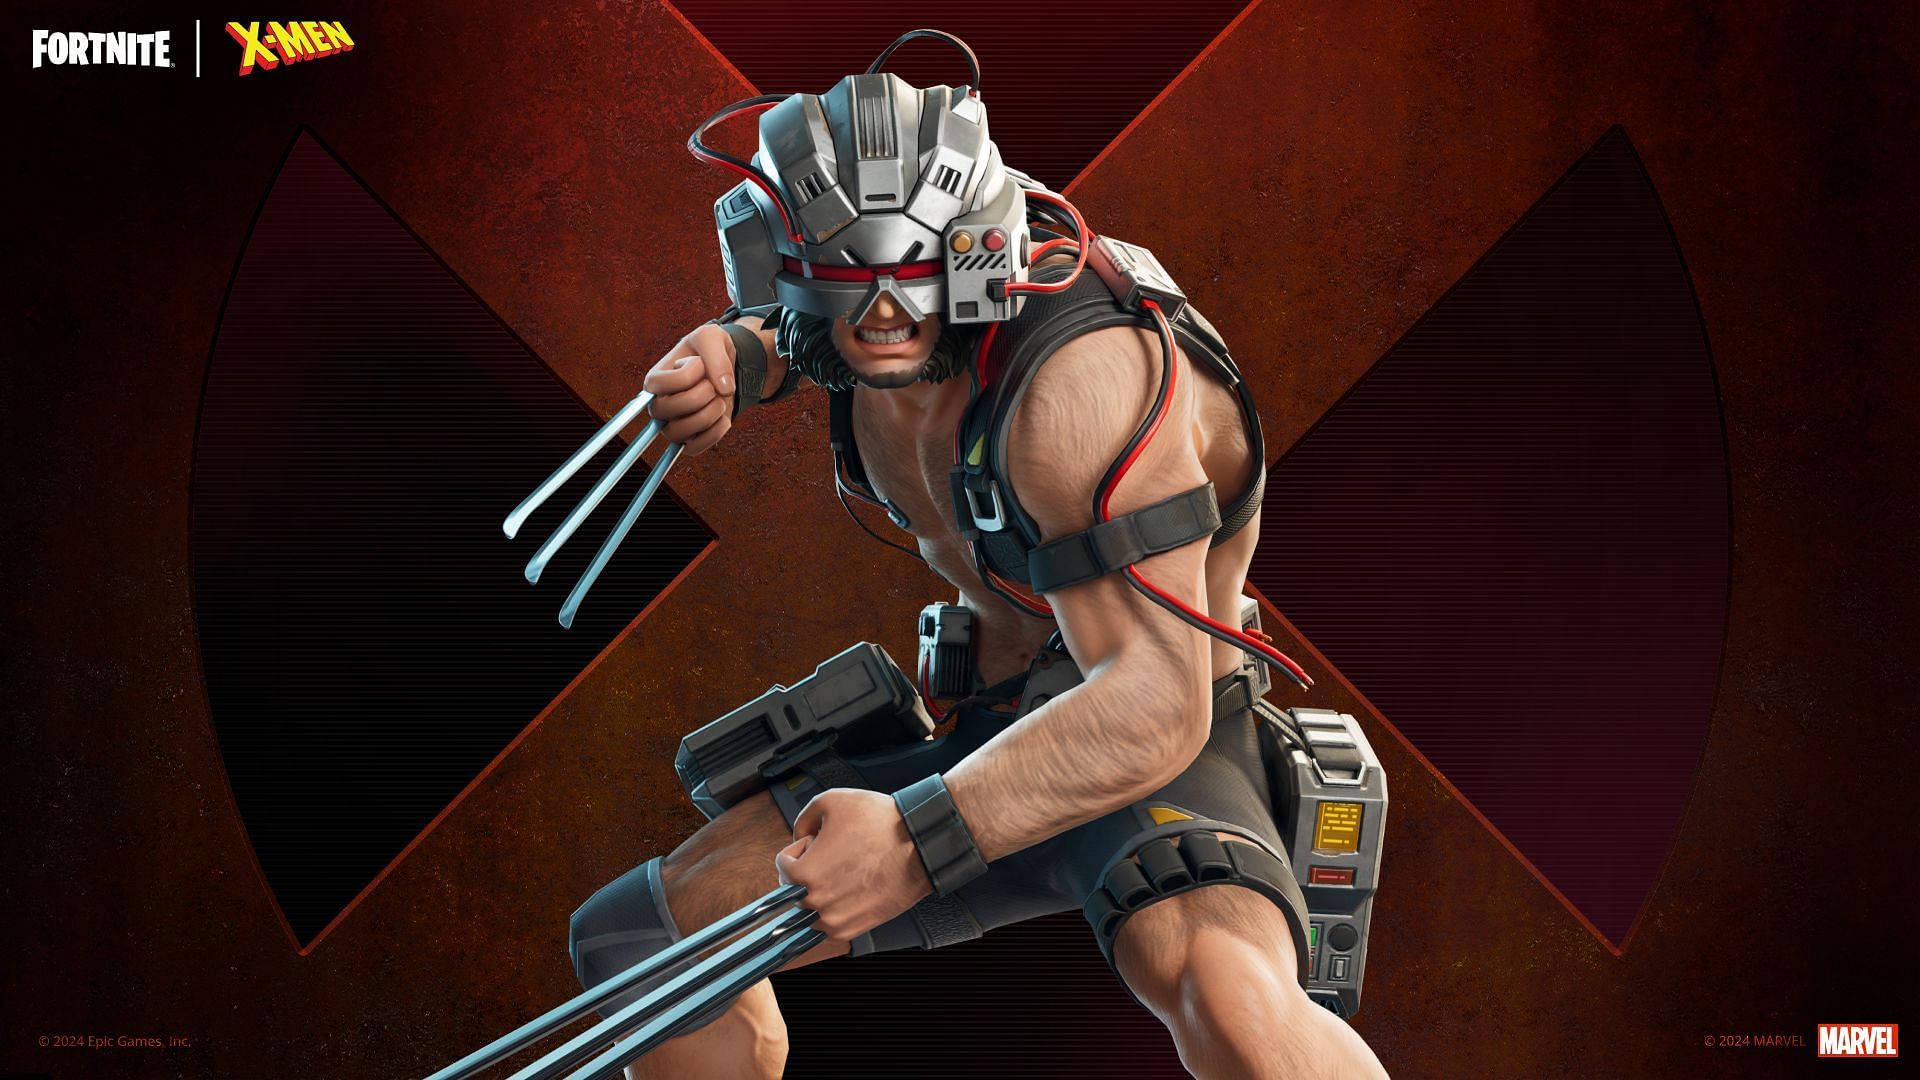 Weapon X (Wolverine) skin is now in Fortnite (Image via Epic Games)